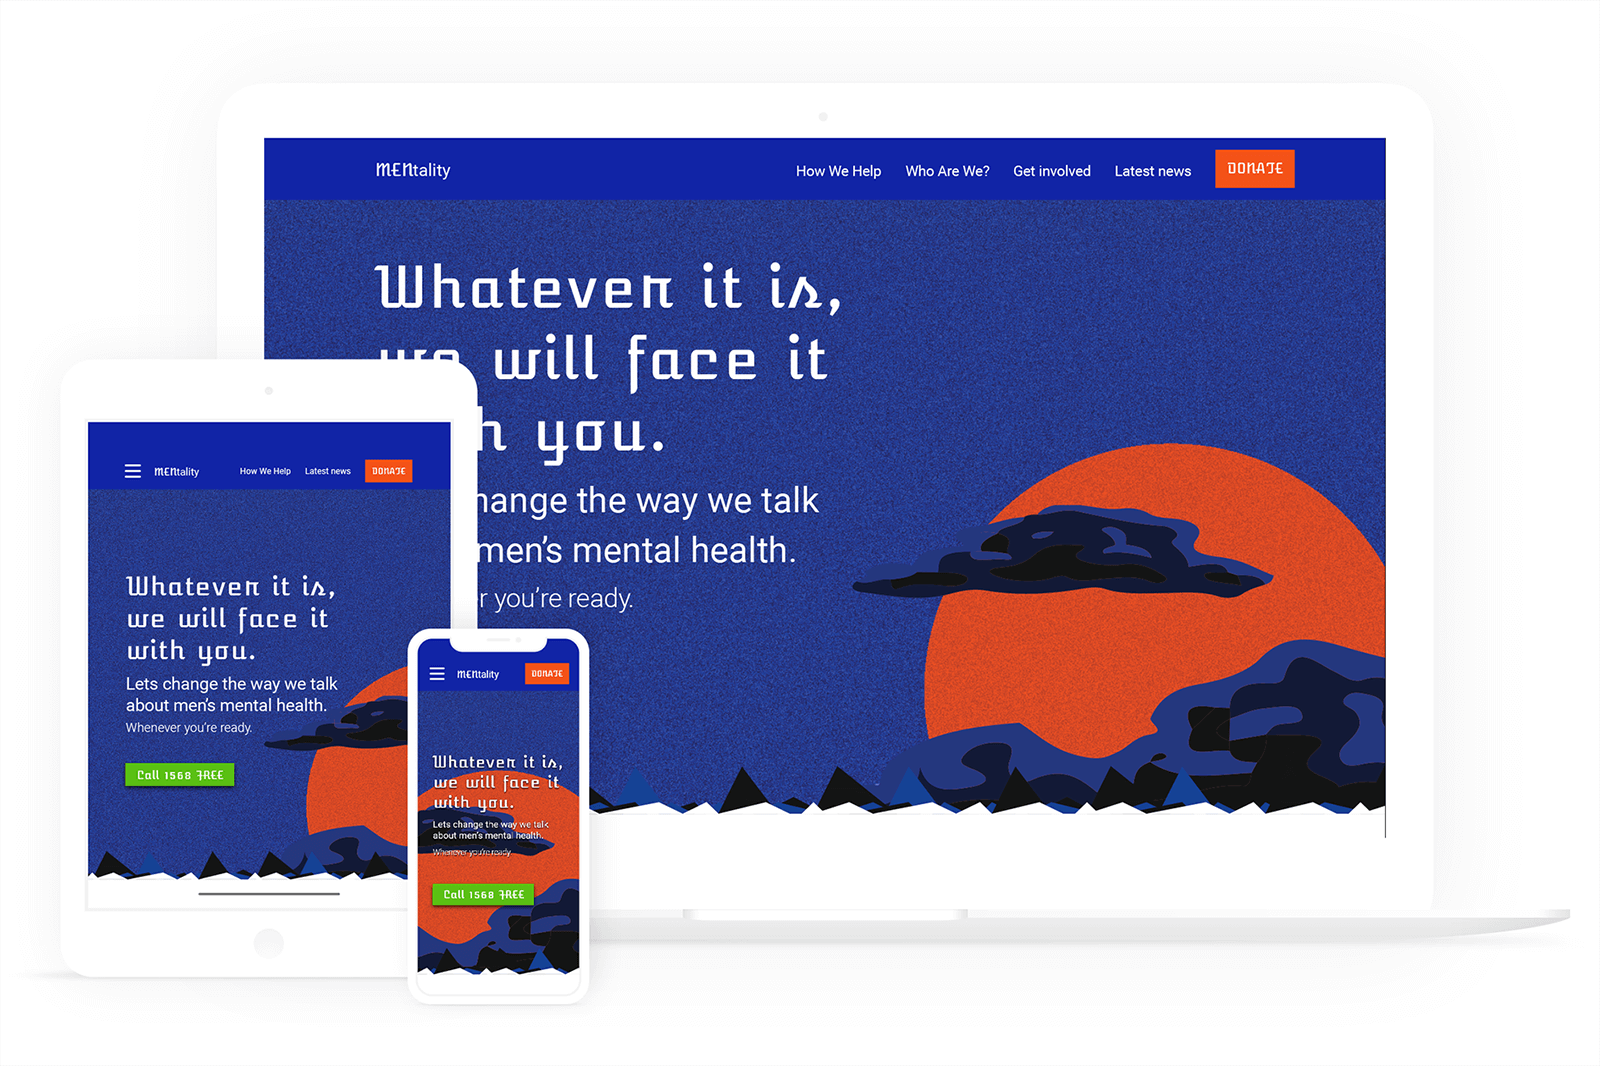 The design of the header and landing page along with their various breaking points